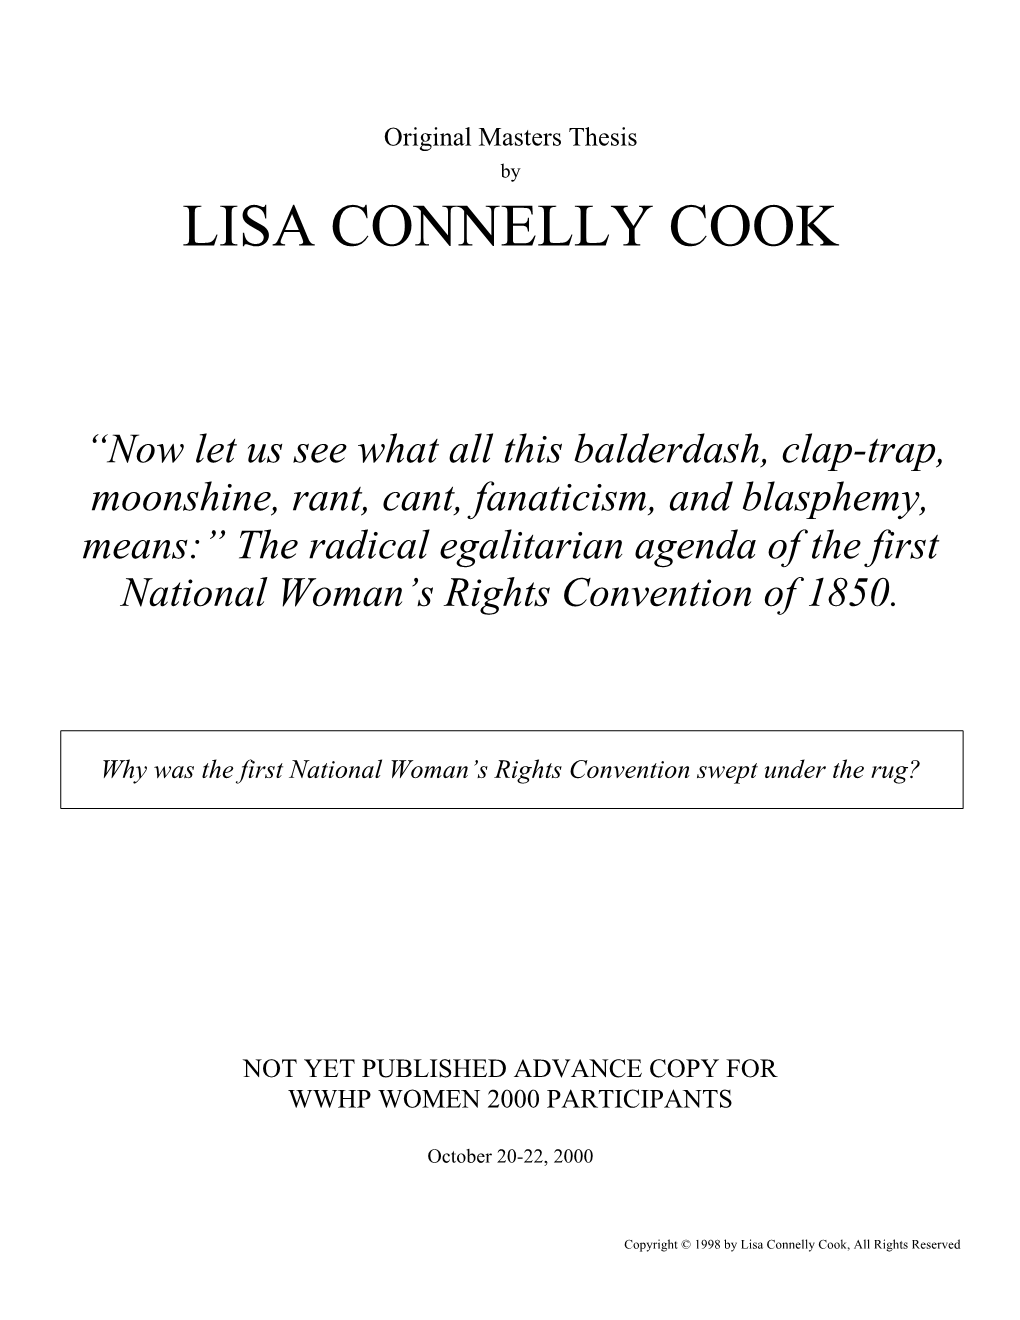 Lisa Connelly Cook